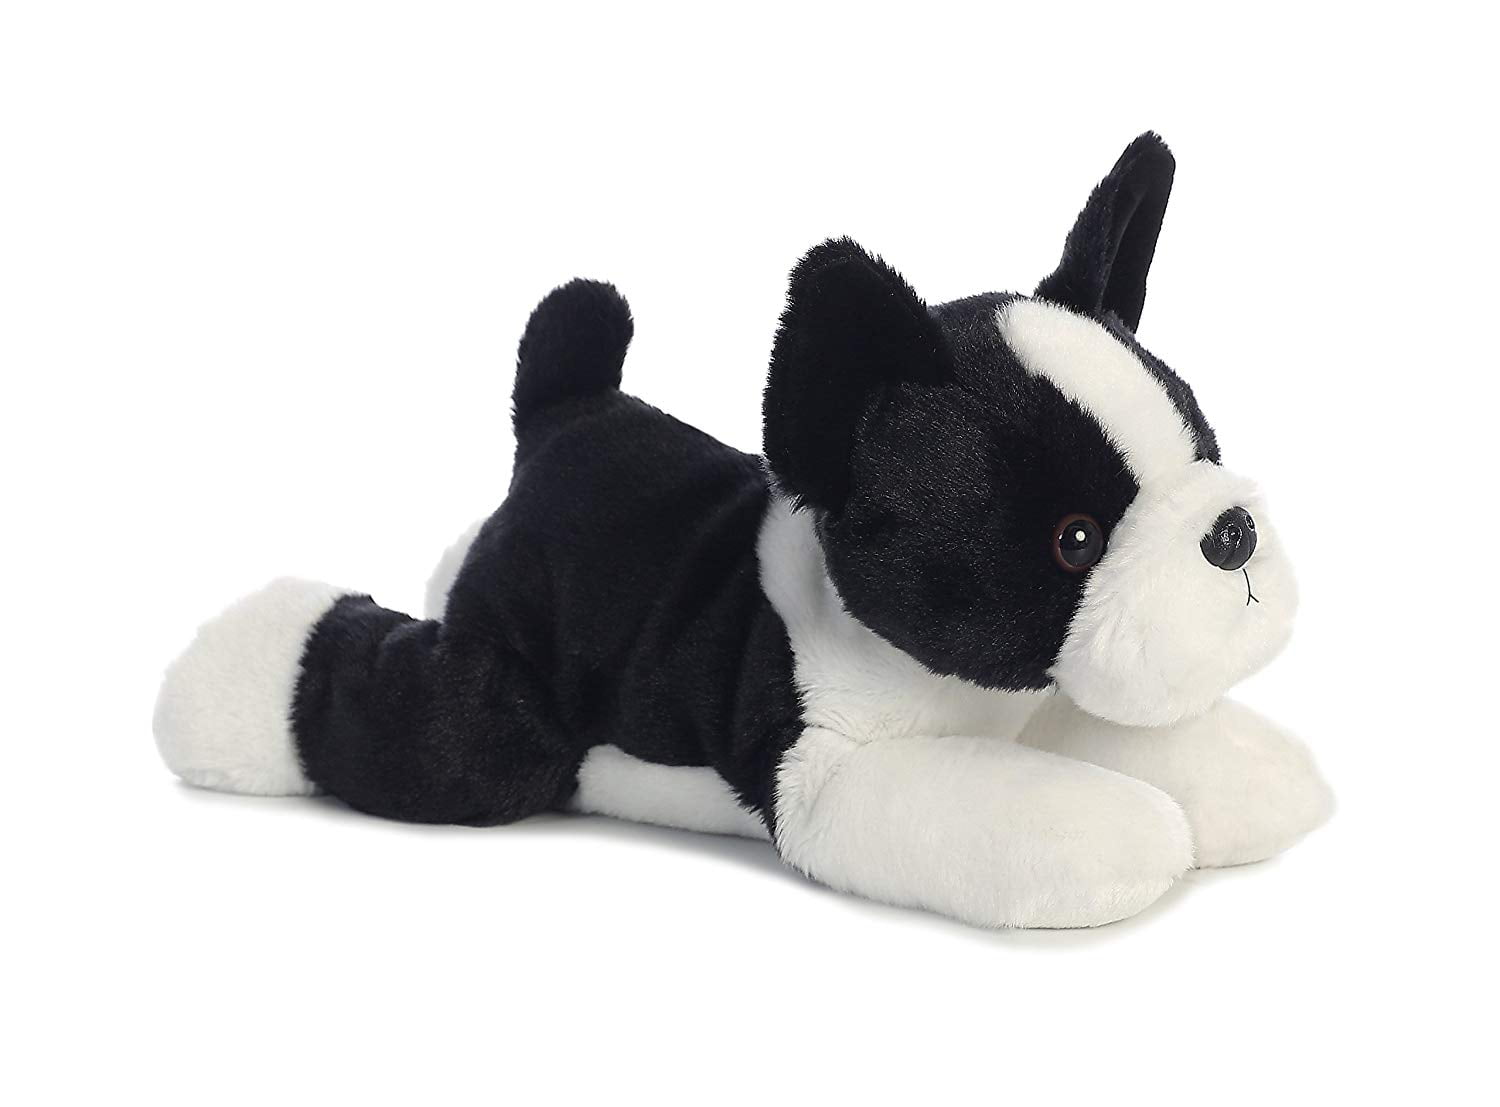 8 Inch Quincy Boston Terrier Dog Plush Stuffed Animal by Douglas for sale online 